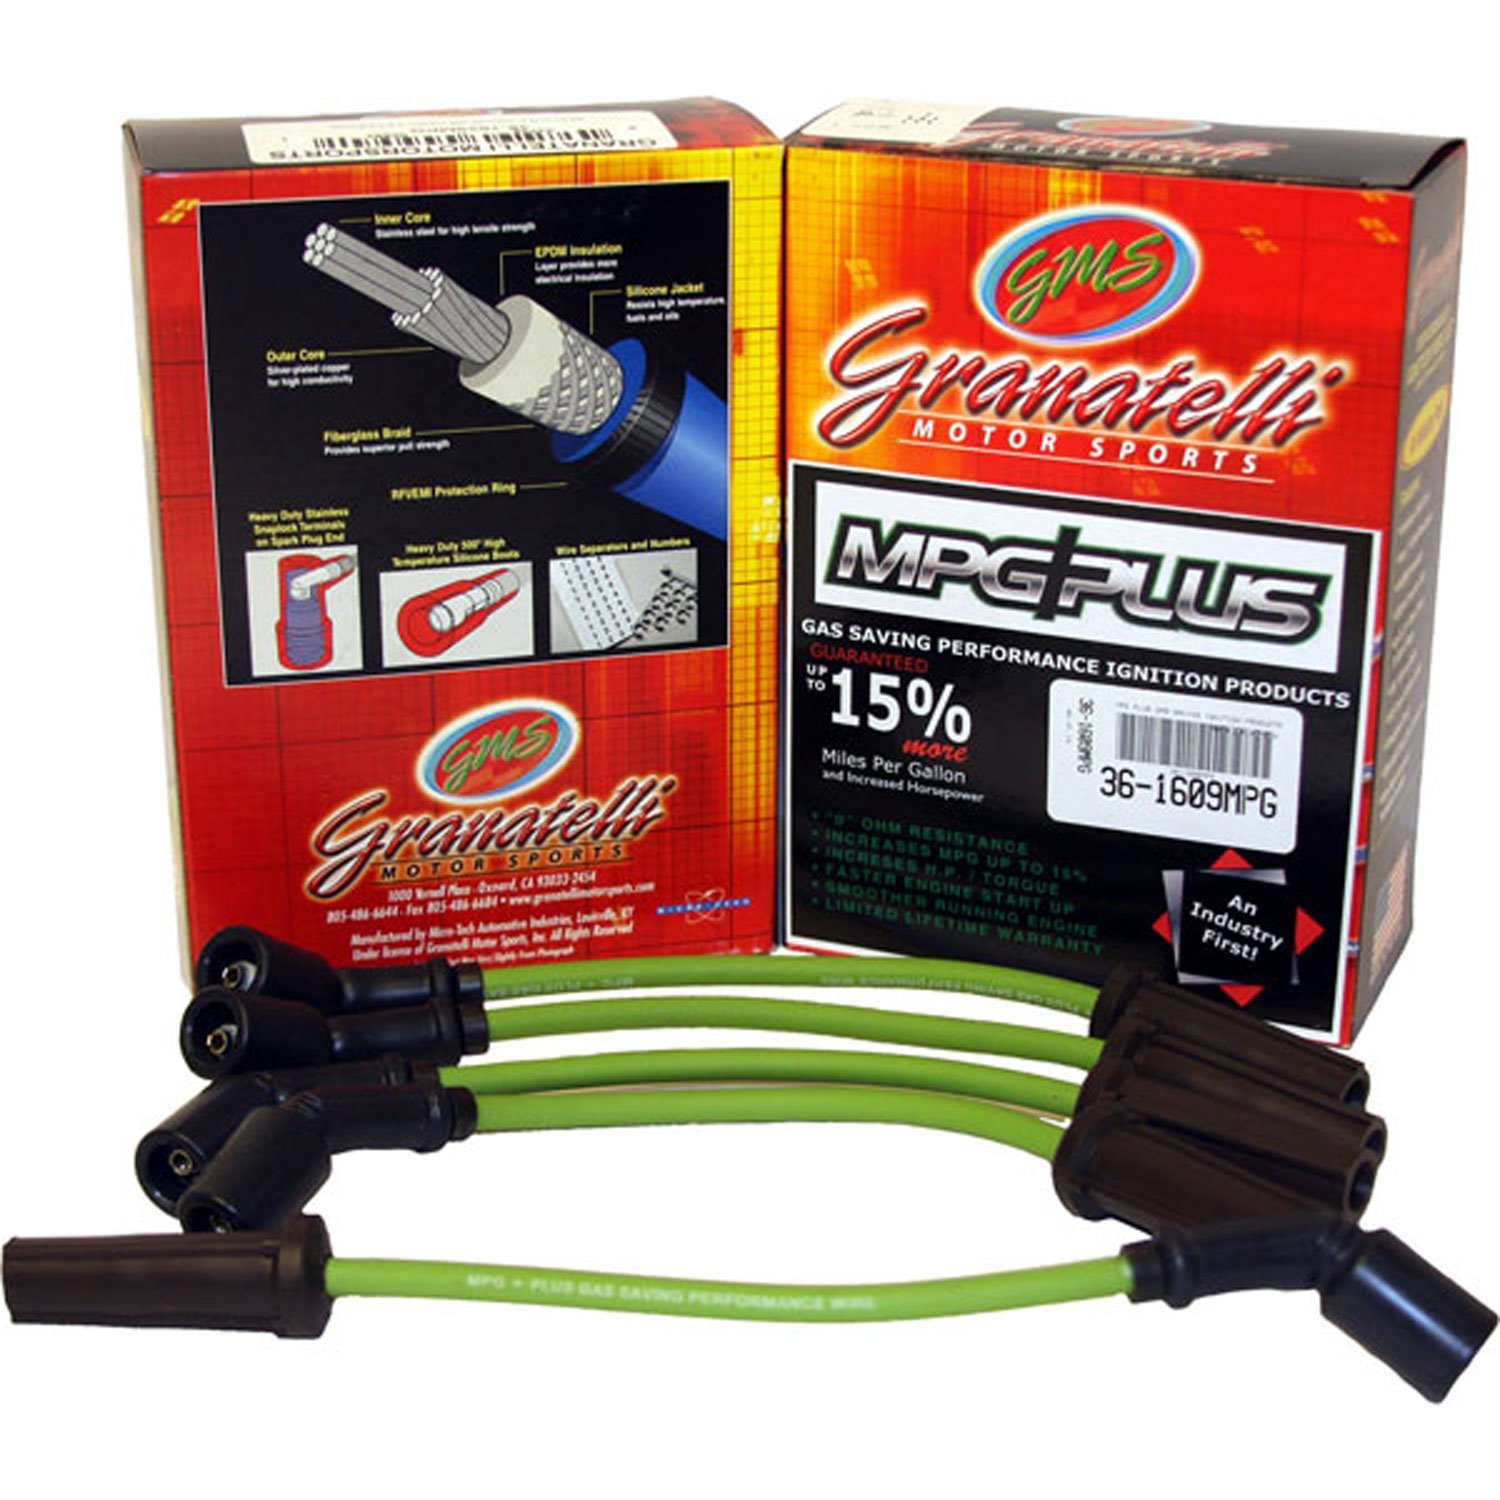 MPG Wires FORD PROBE 4CYL 2.0L 93-97